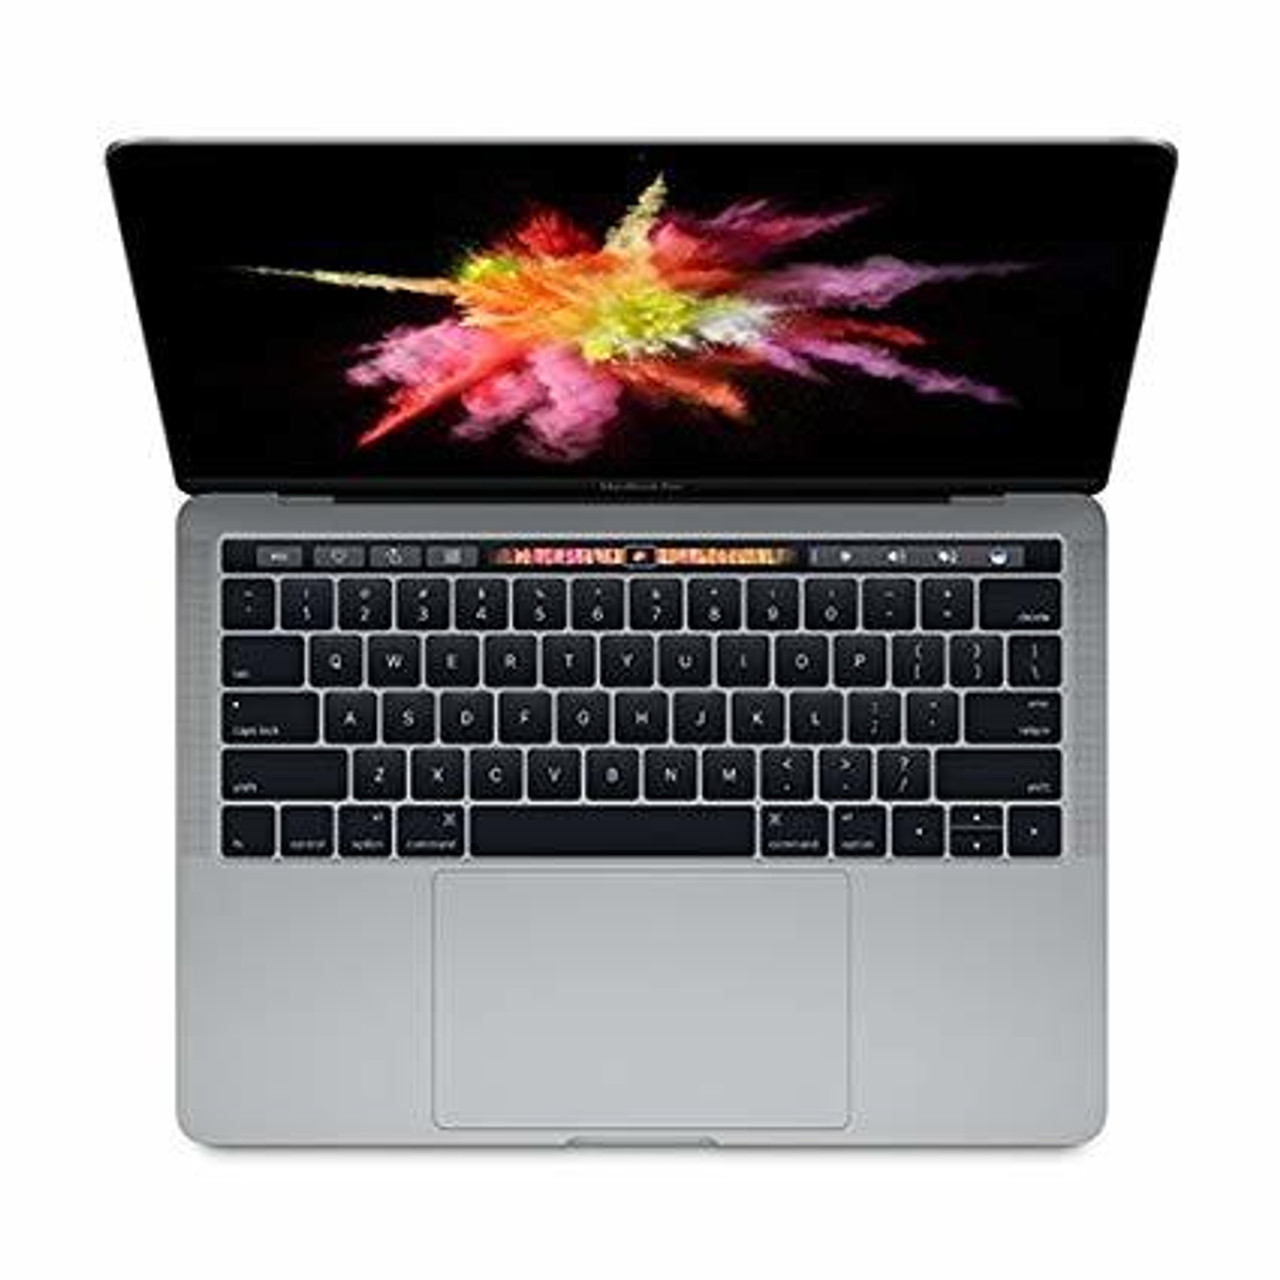 Apple MacBook Pro 13-inch 2.4GHz Core i5 (Mid 2019, Space Gray) MV962LL/A -  Factory Sealed*